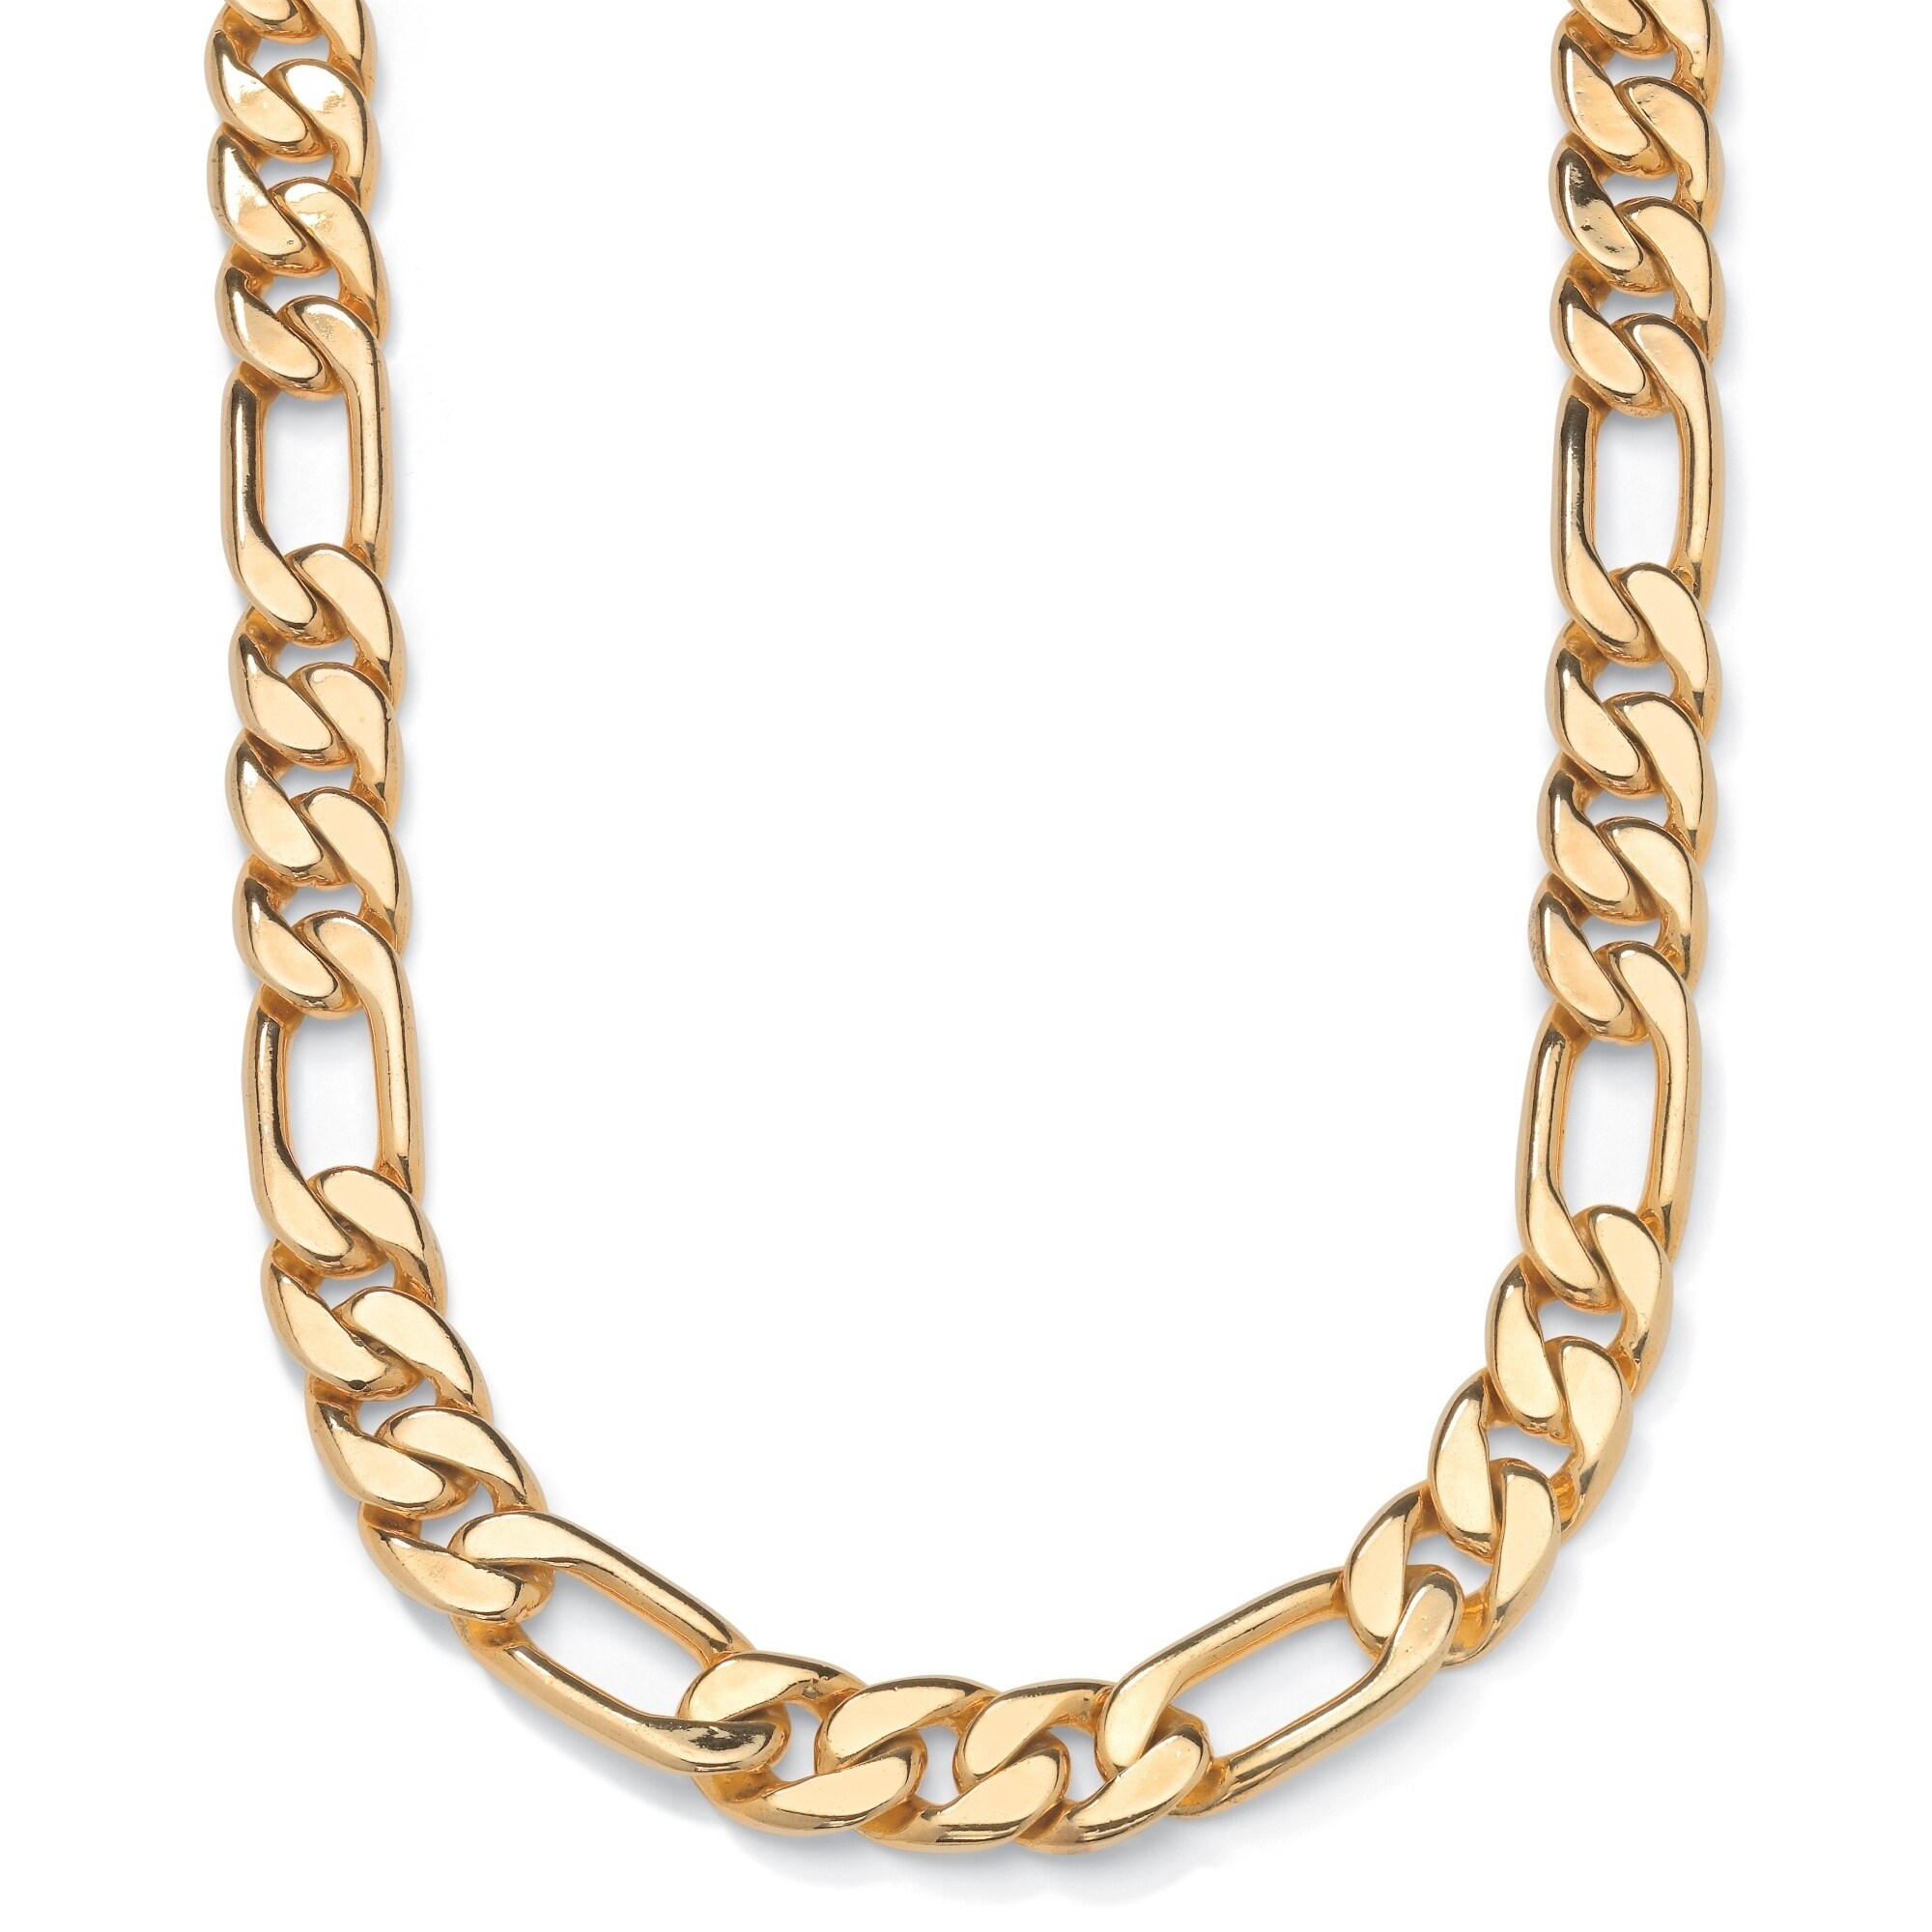 18" MENS GOLD EP 7MM 3 LINK FIGARO CHAIN NECKLACE